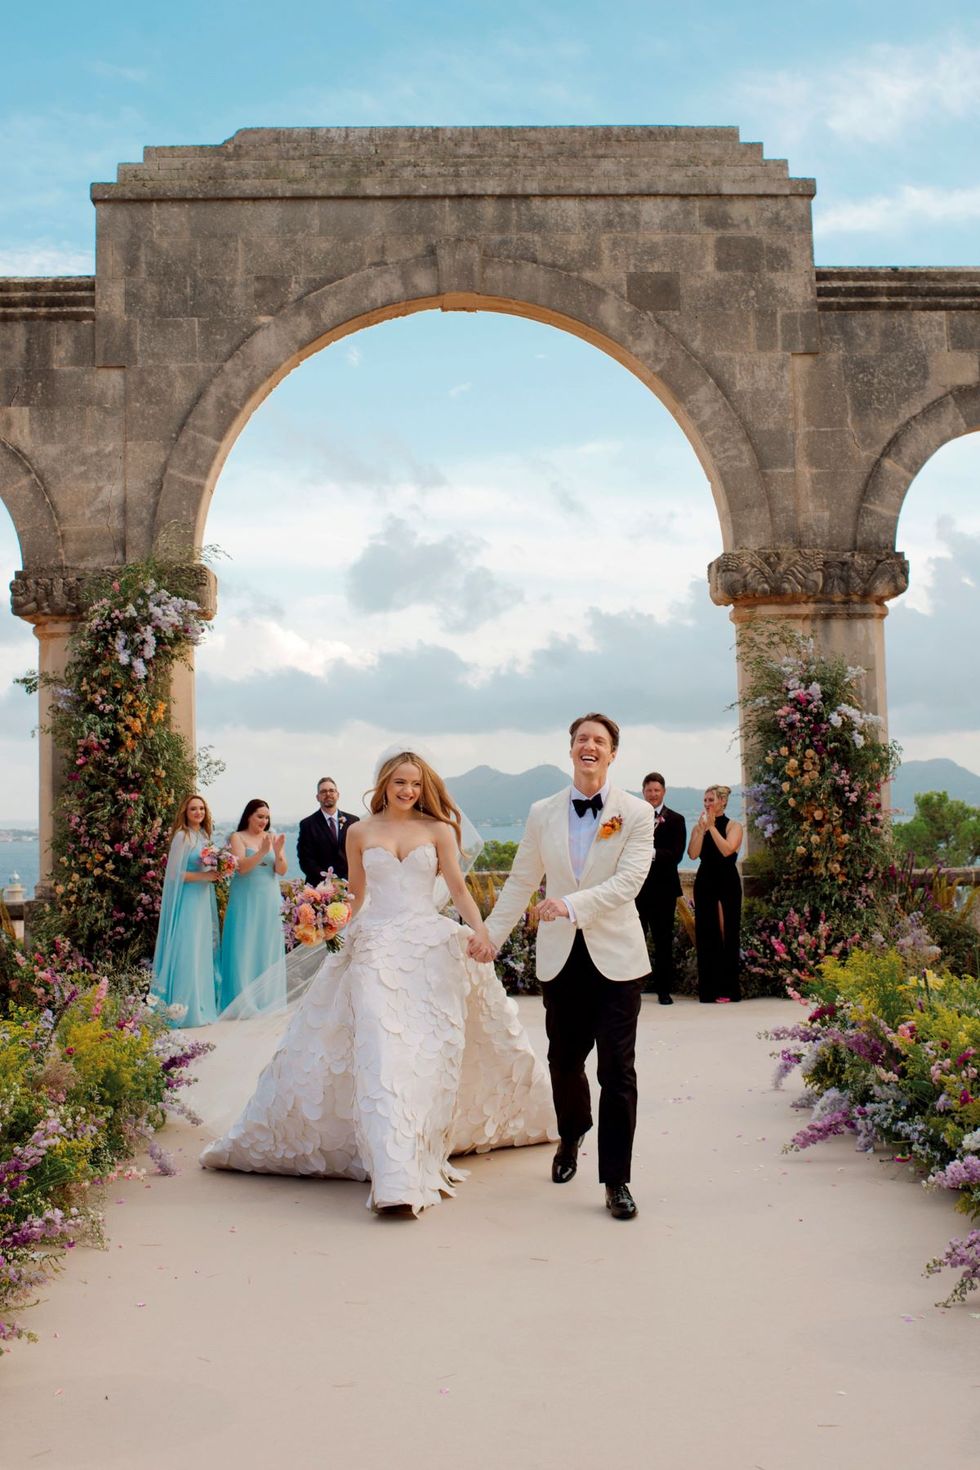 a man and woman in wedding attire walking down a path with a large arch behind them